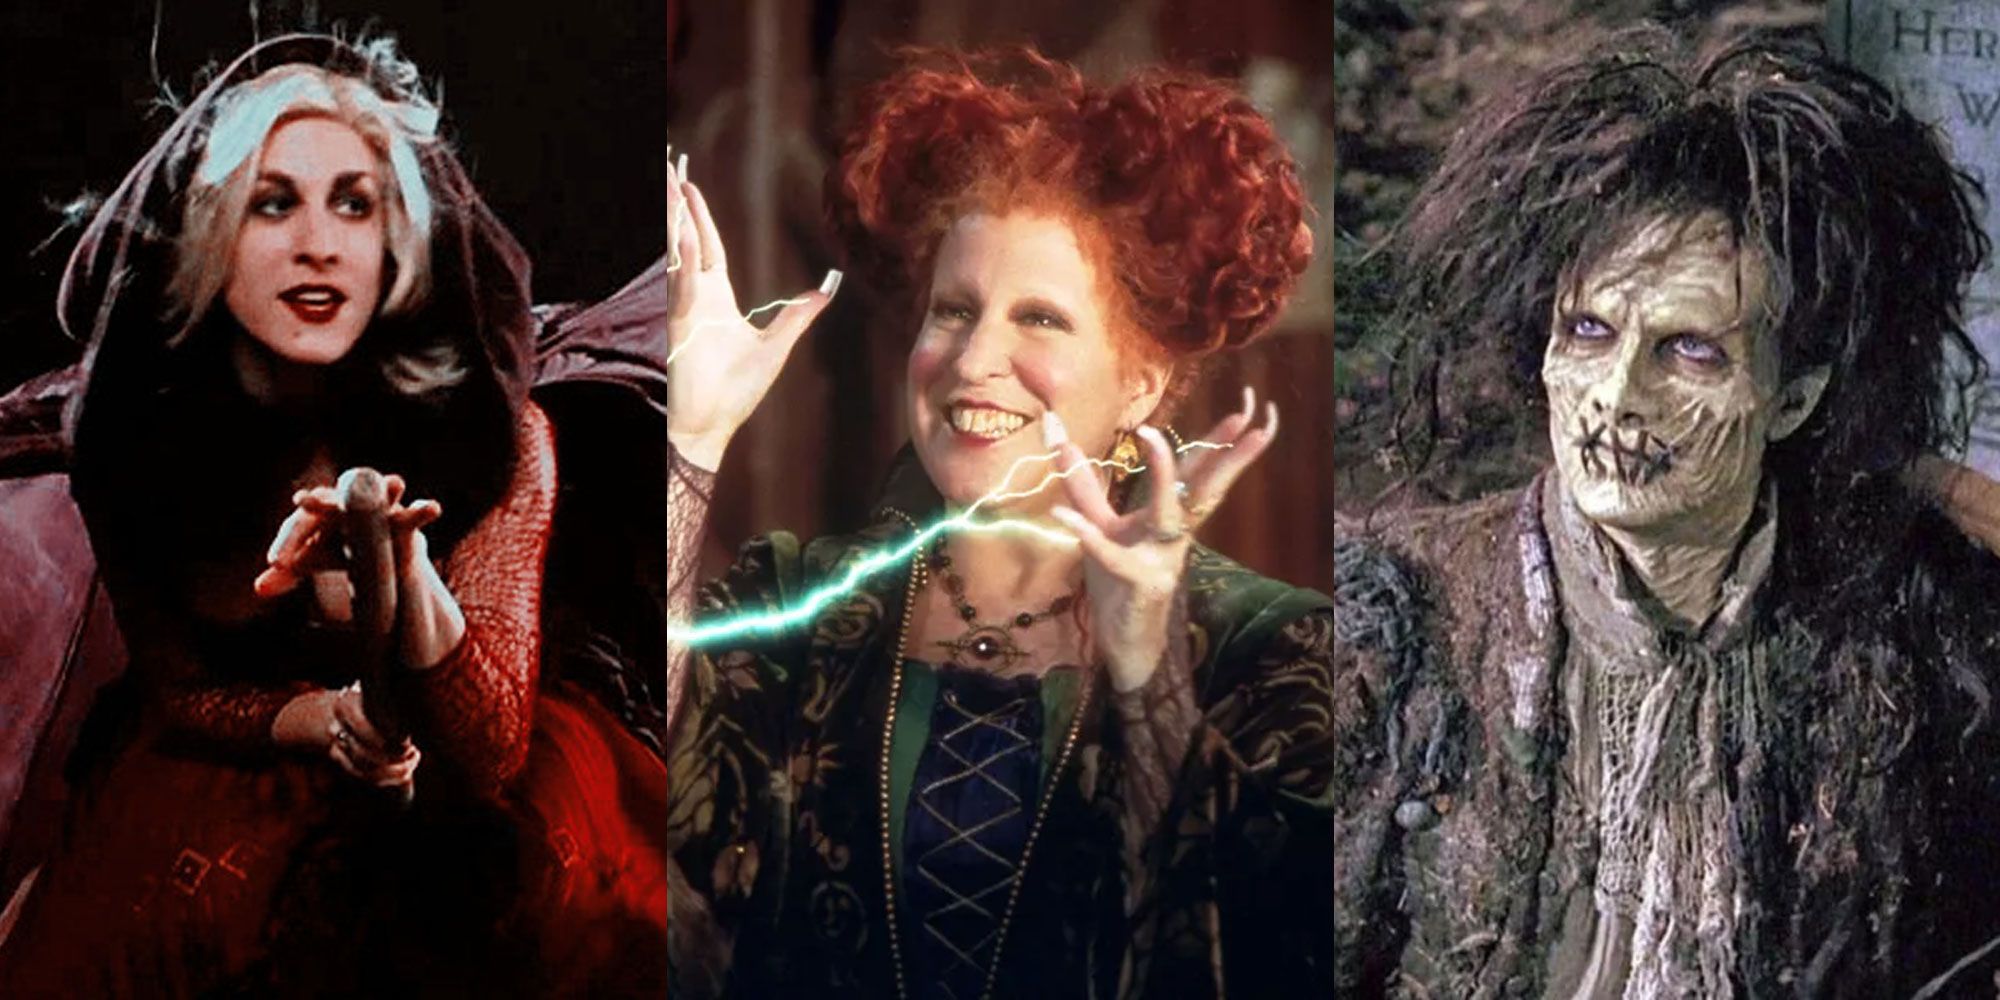 Witch and famous – Sanderson sisters celebrate 25 years of Hocus